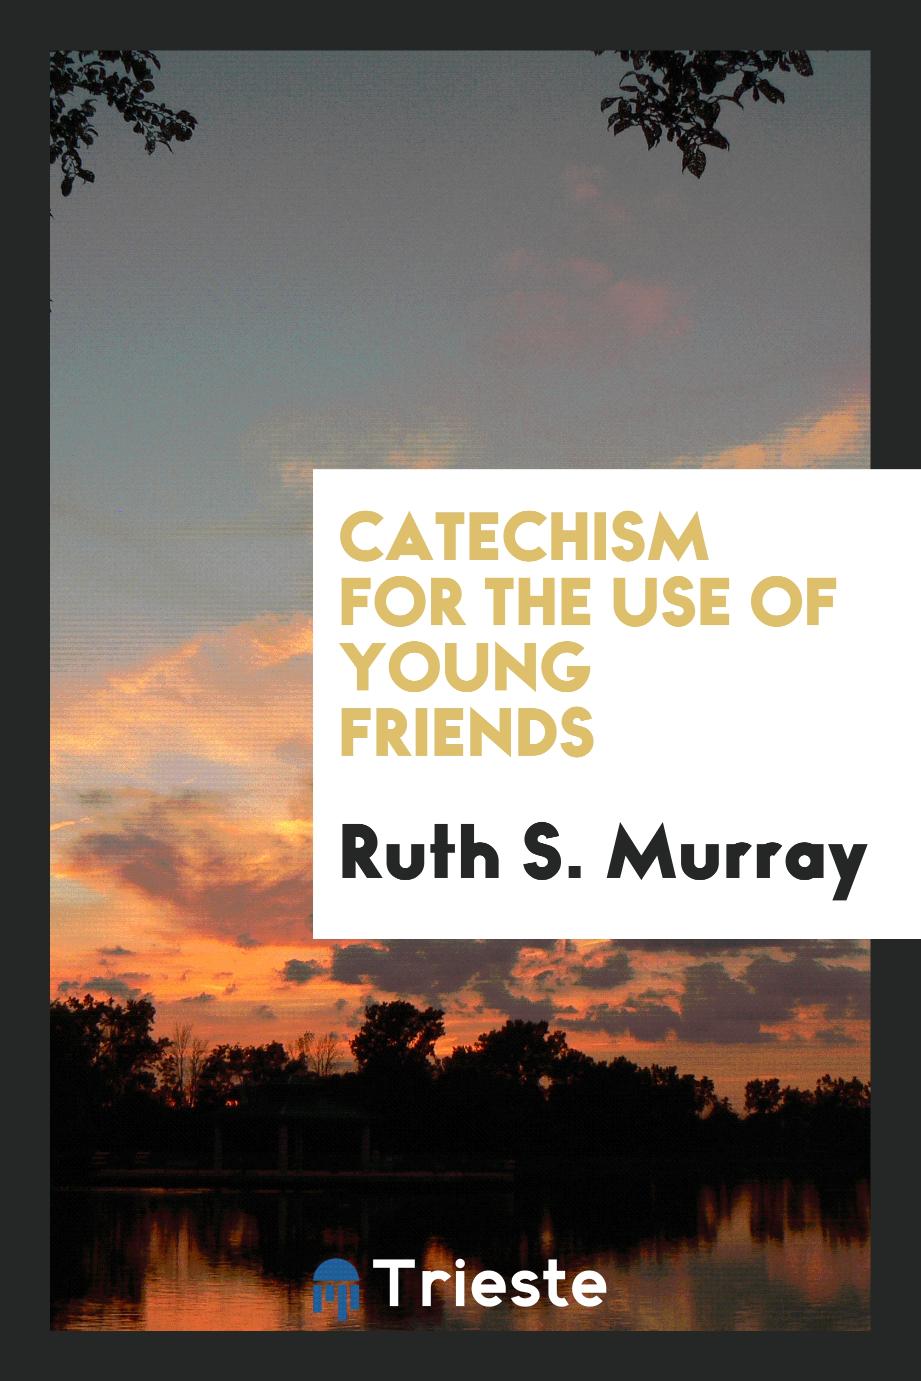 Catechism for the Use of Young Friends